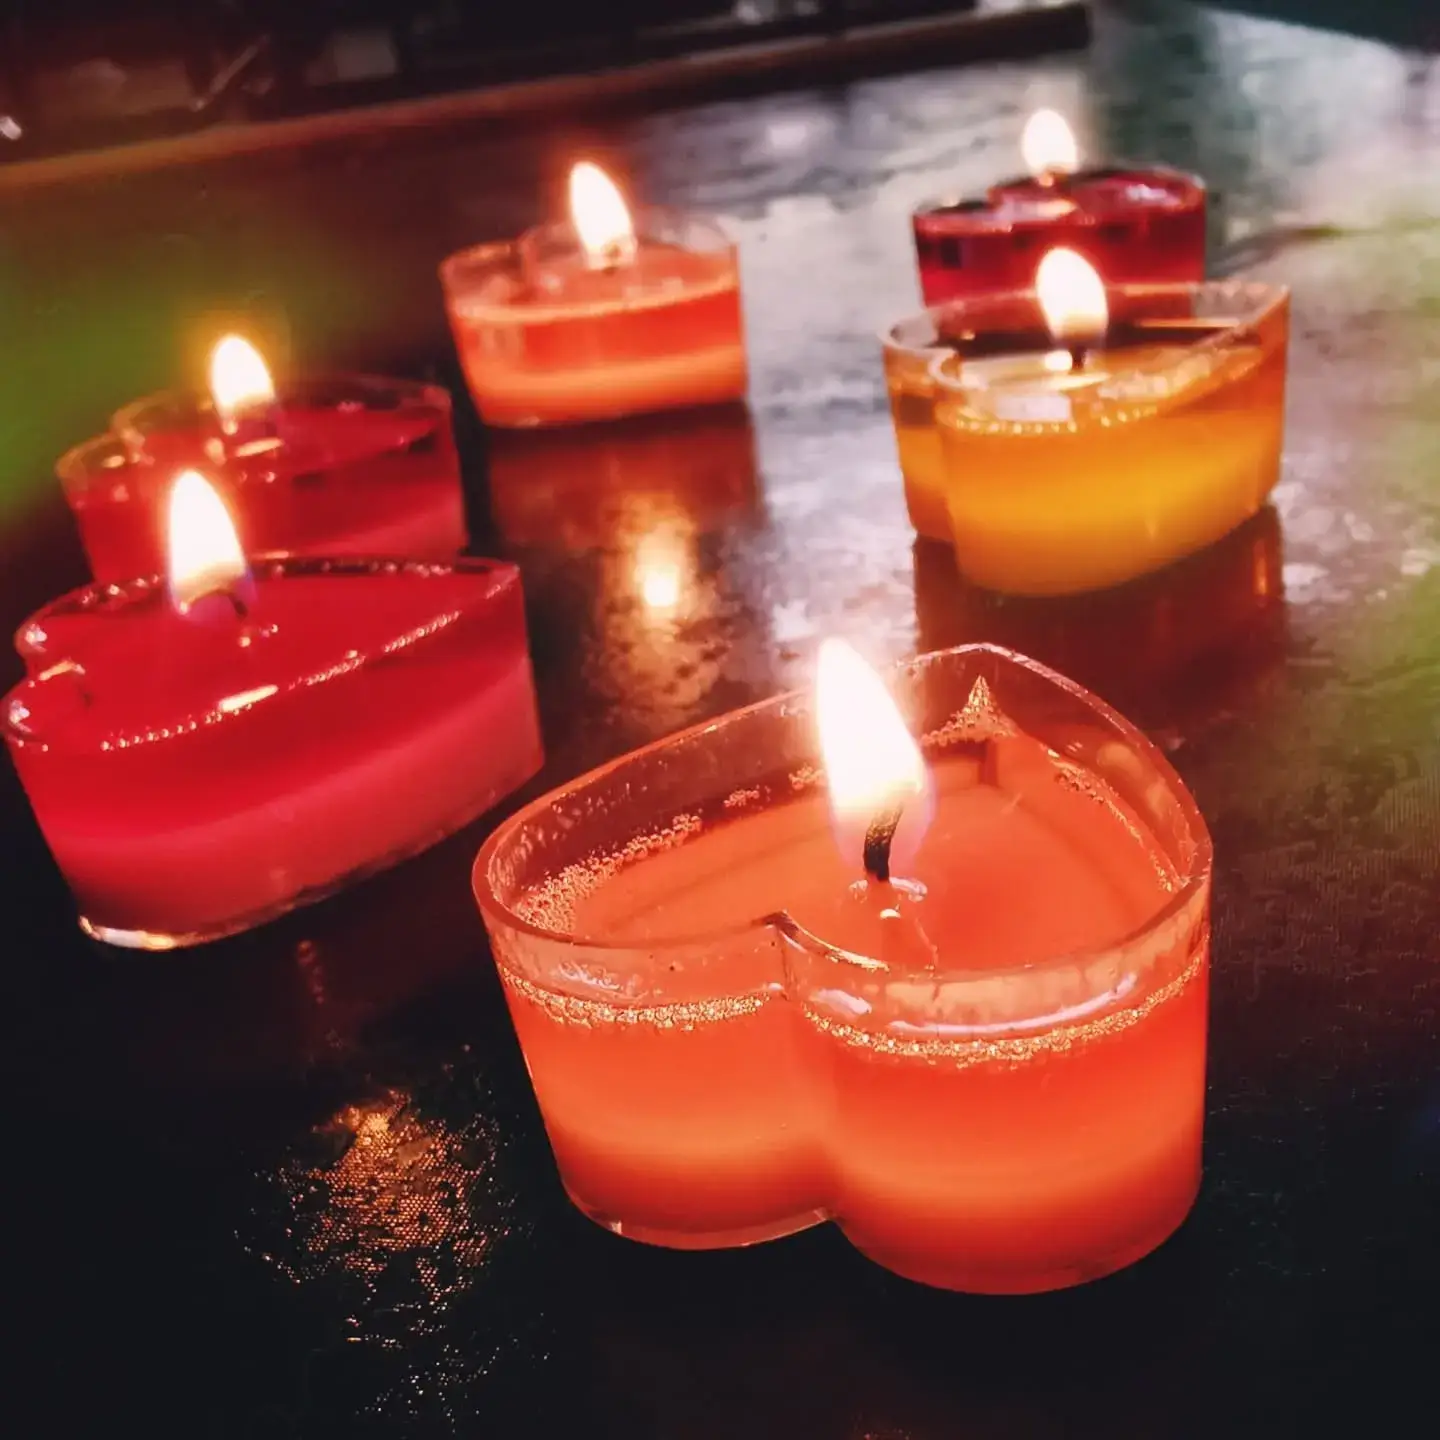 The Candle Bar in Mason turned a pandemic hobby into a lit business